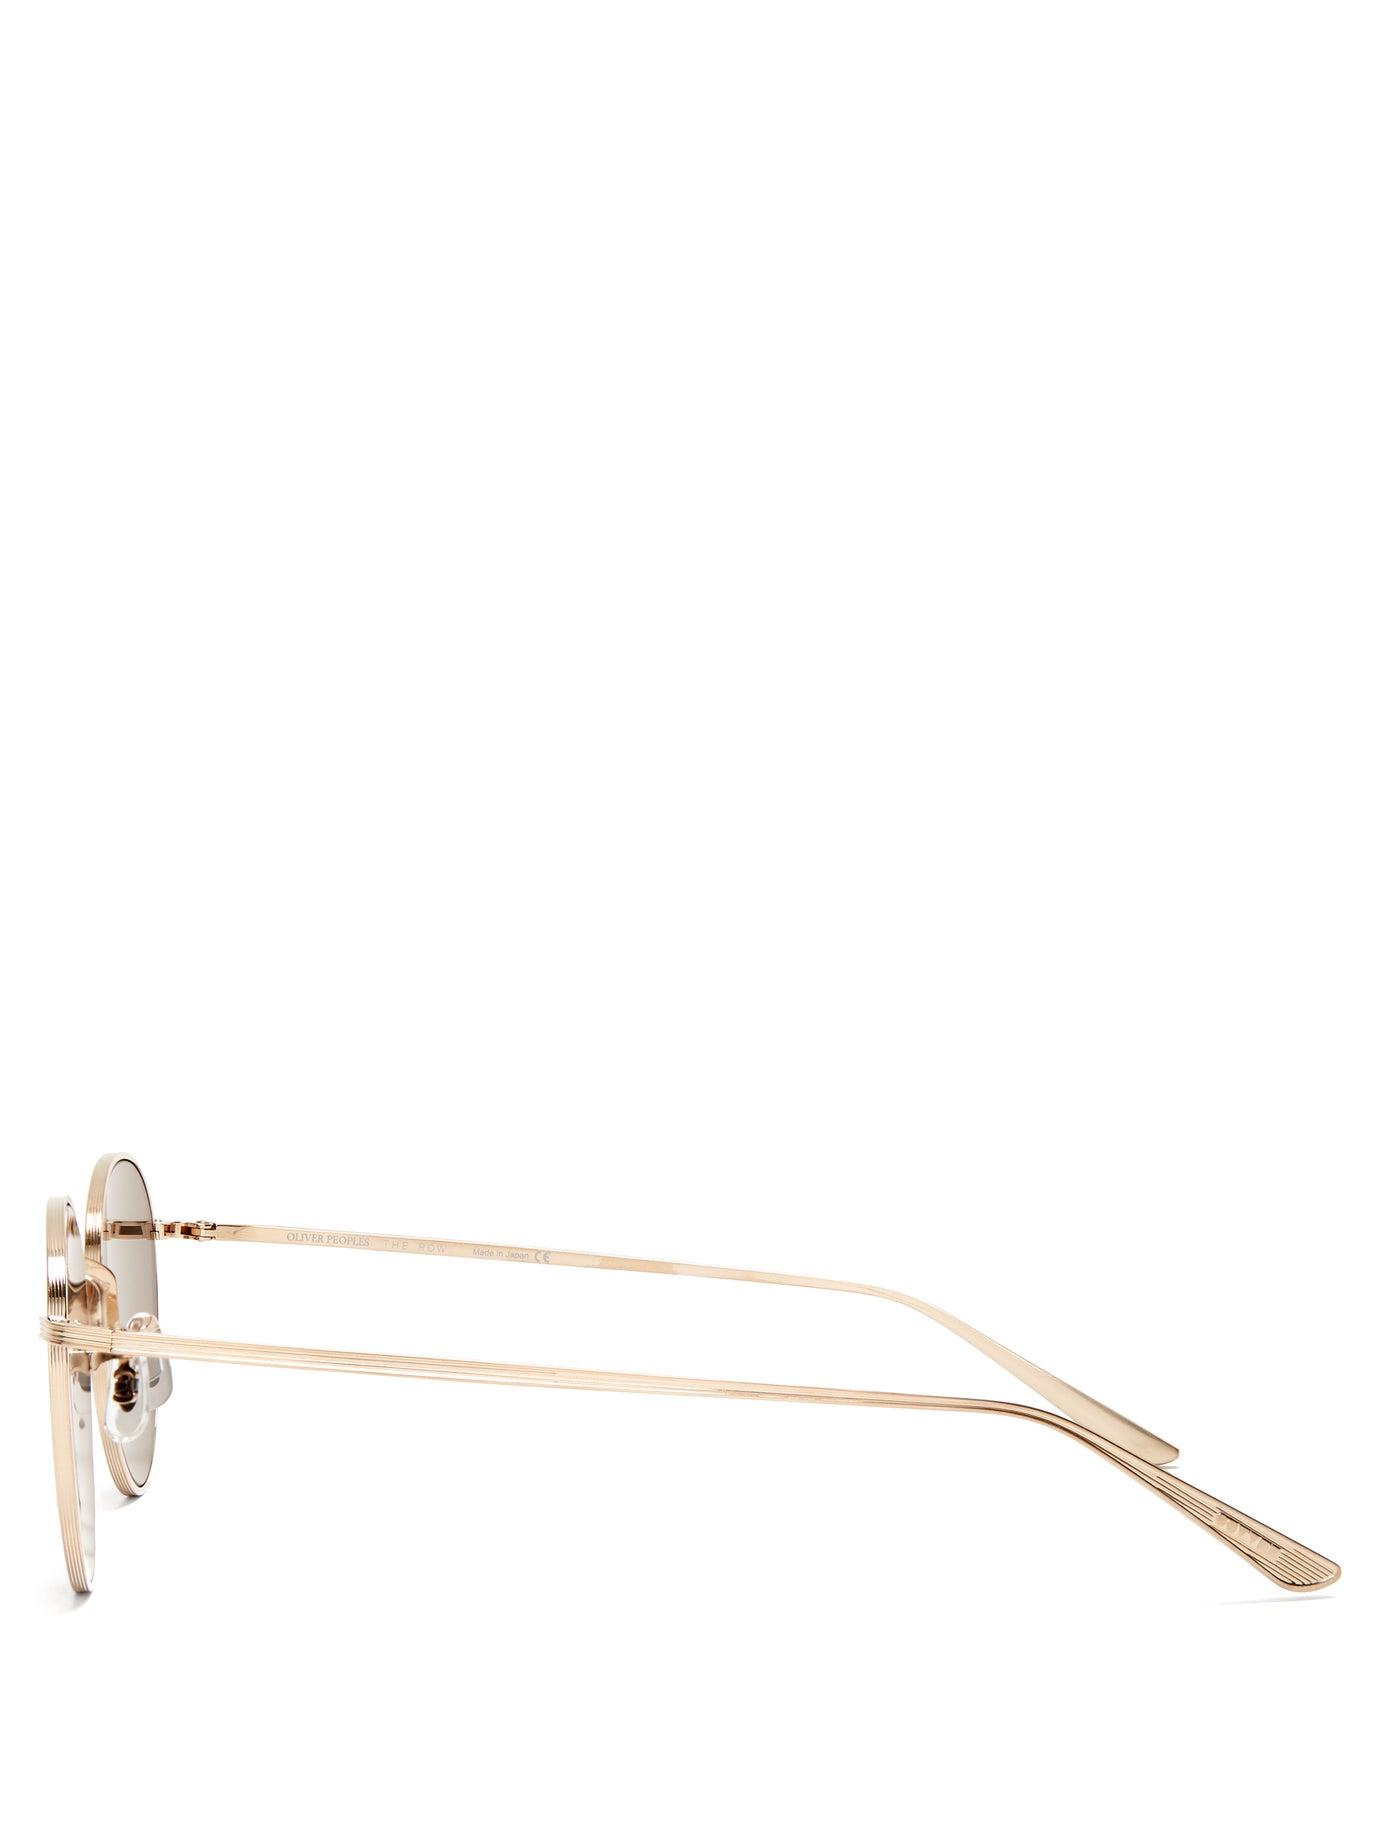 The Row X Oliver Peoples Brownstone 2 Sunglasses in Metallic